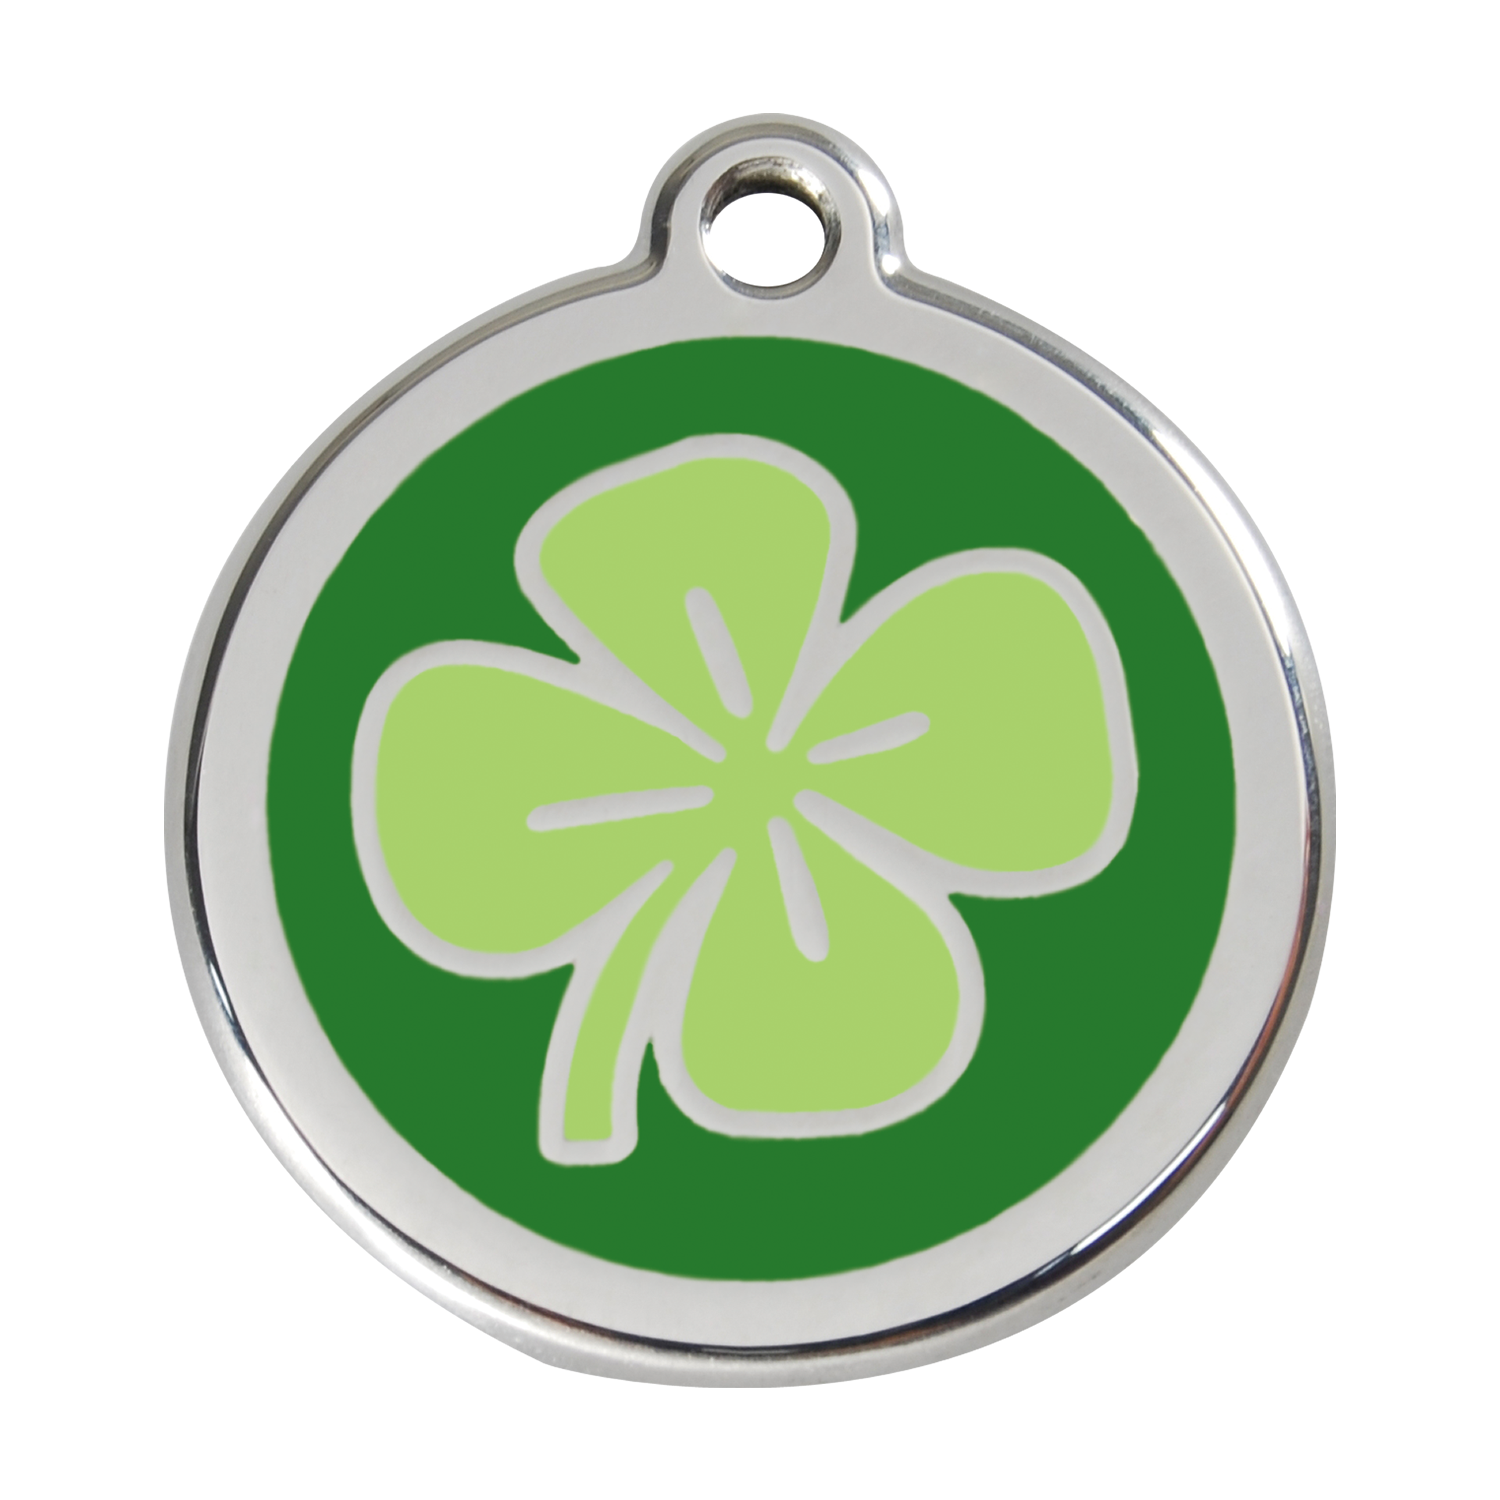 Red Dingo Stainless Steel & Enamel Green Clover Dog ID Tag